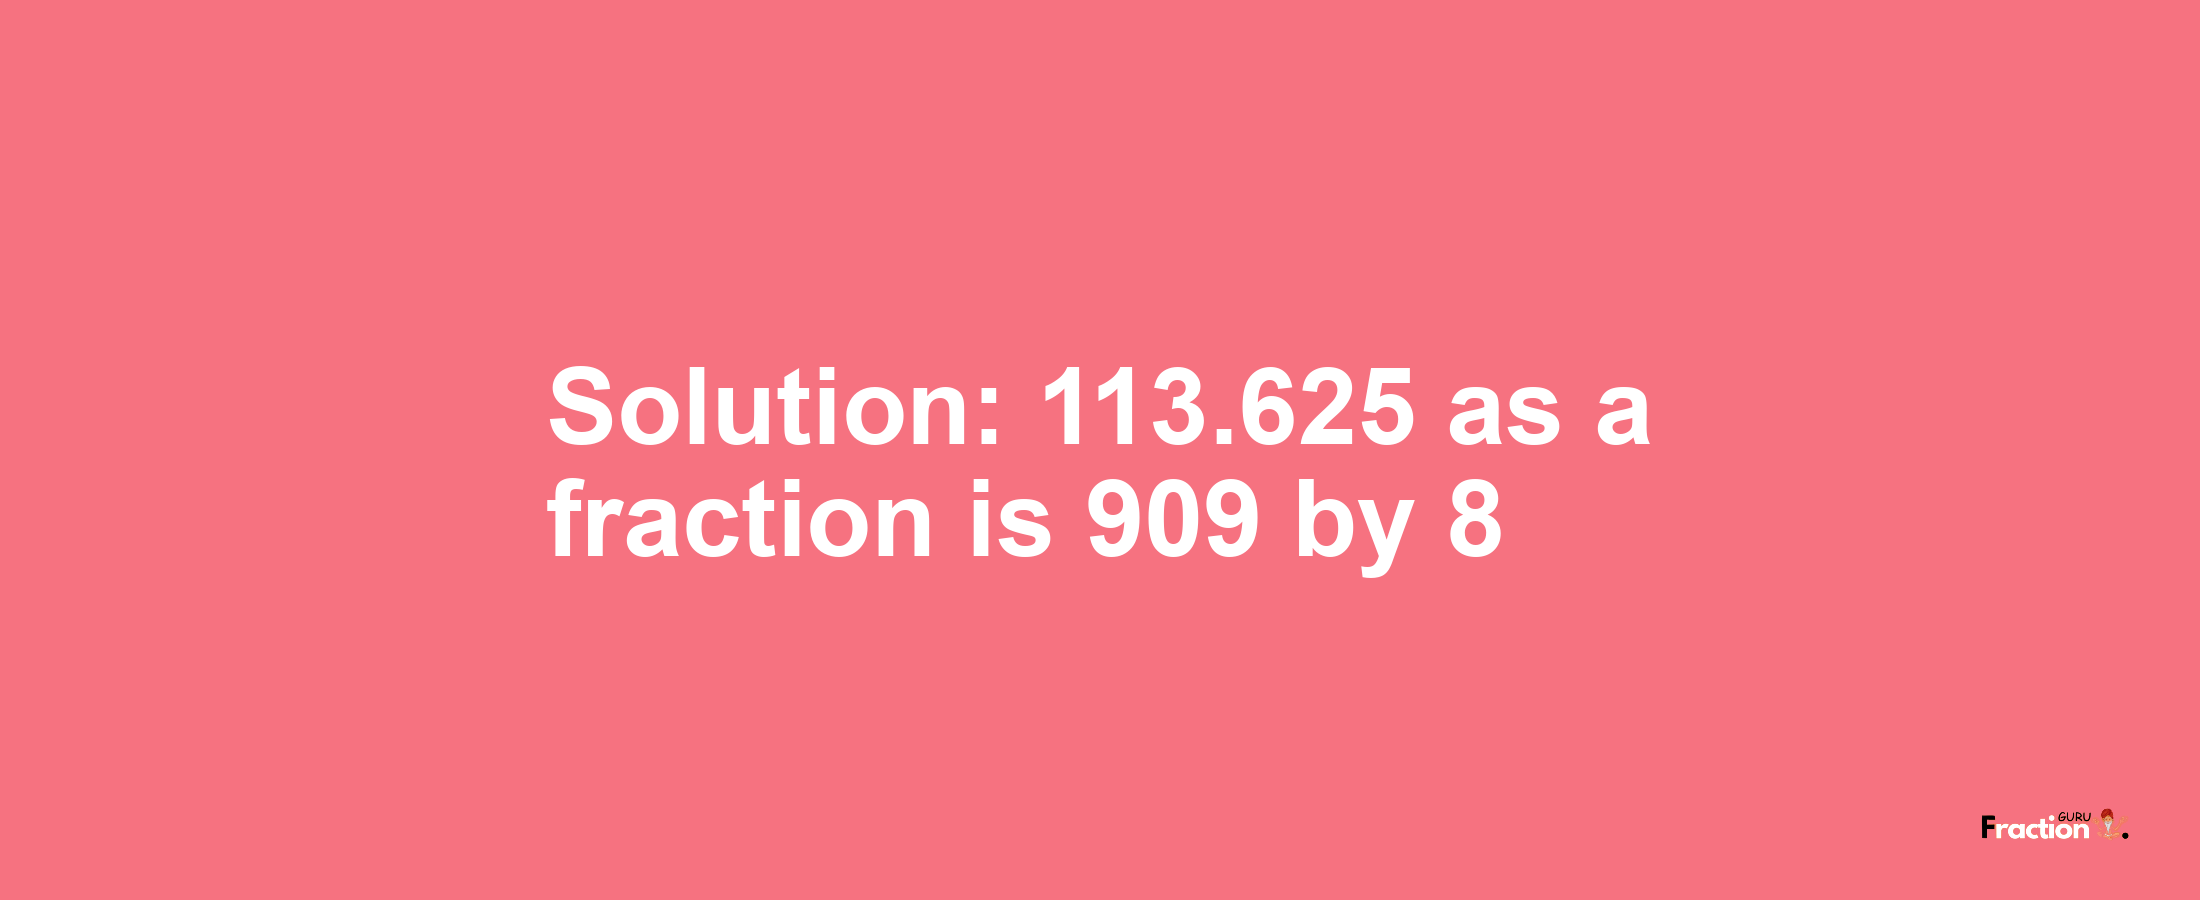 Solution:113.625 as a fraction is 909/8